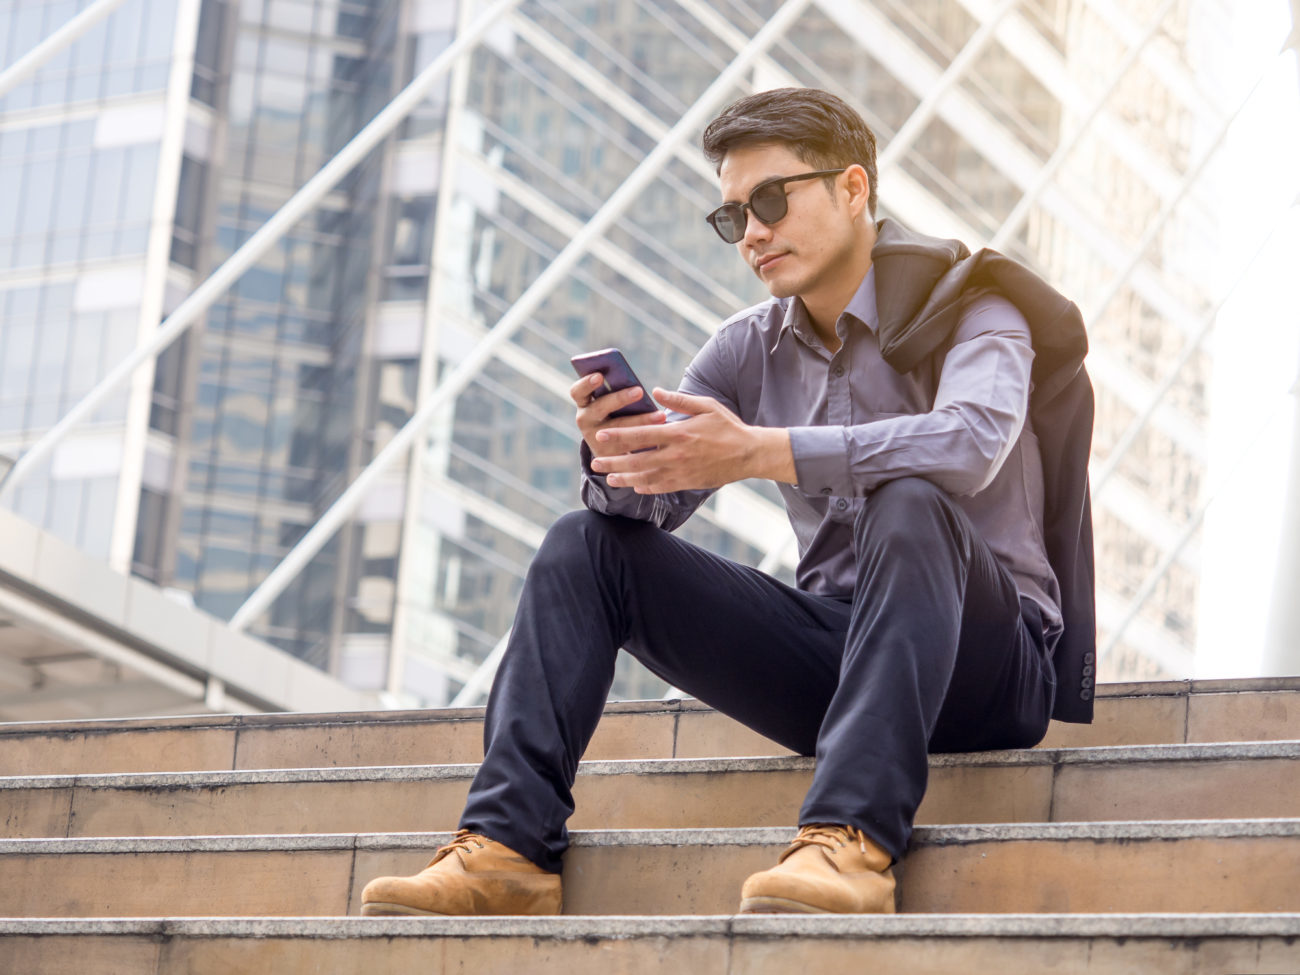 A young professional looks at his phone while sitting on stairs outside of a large building